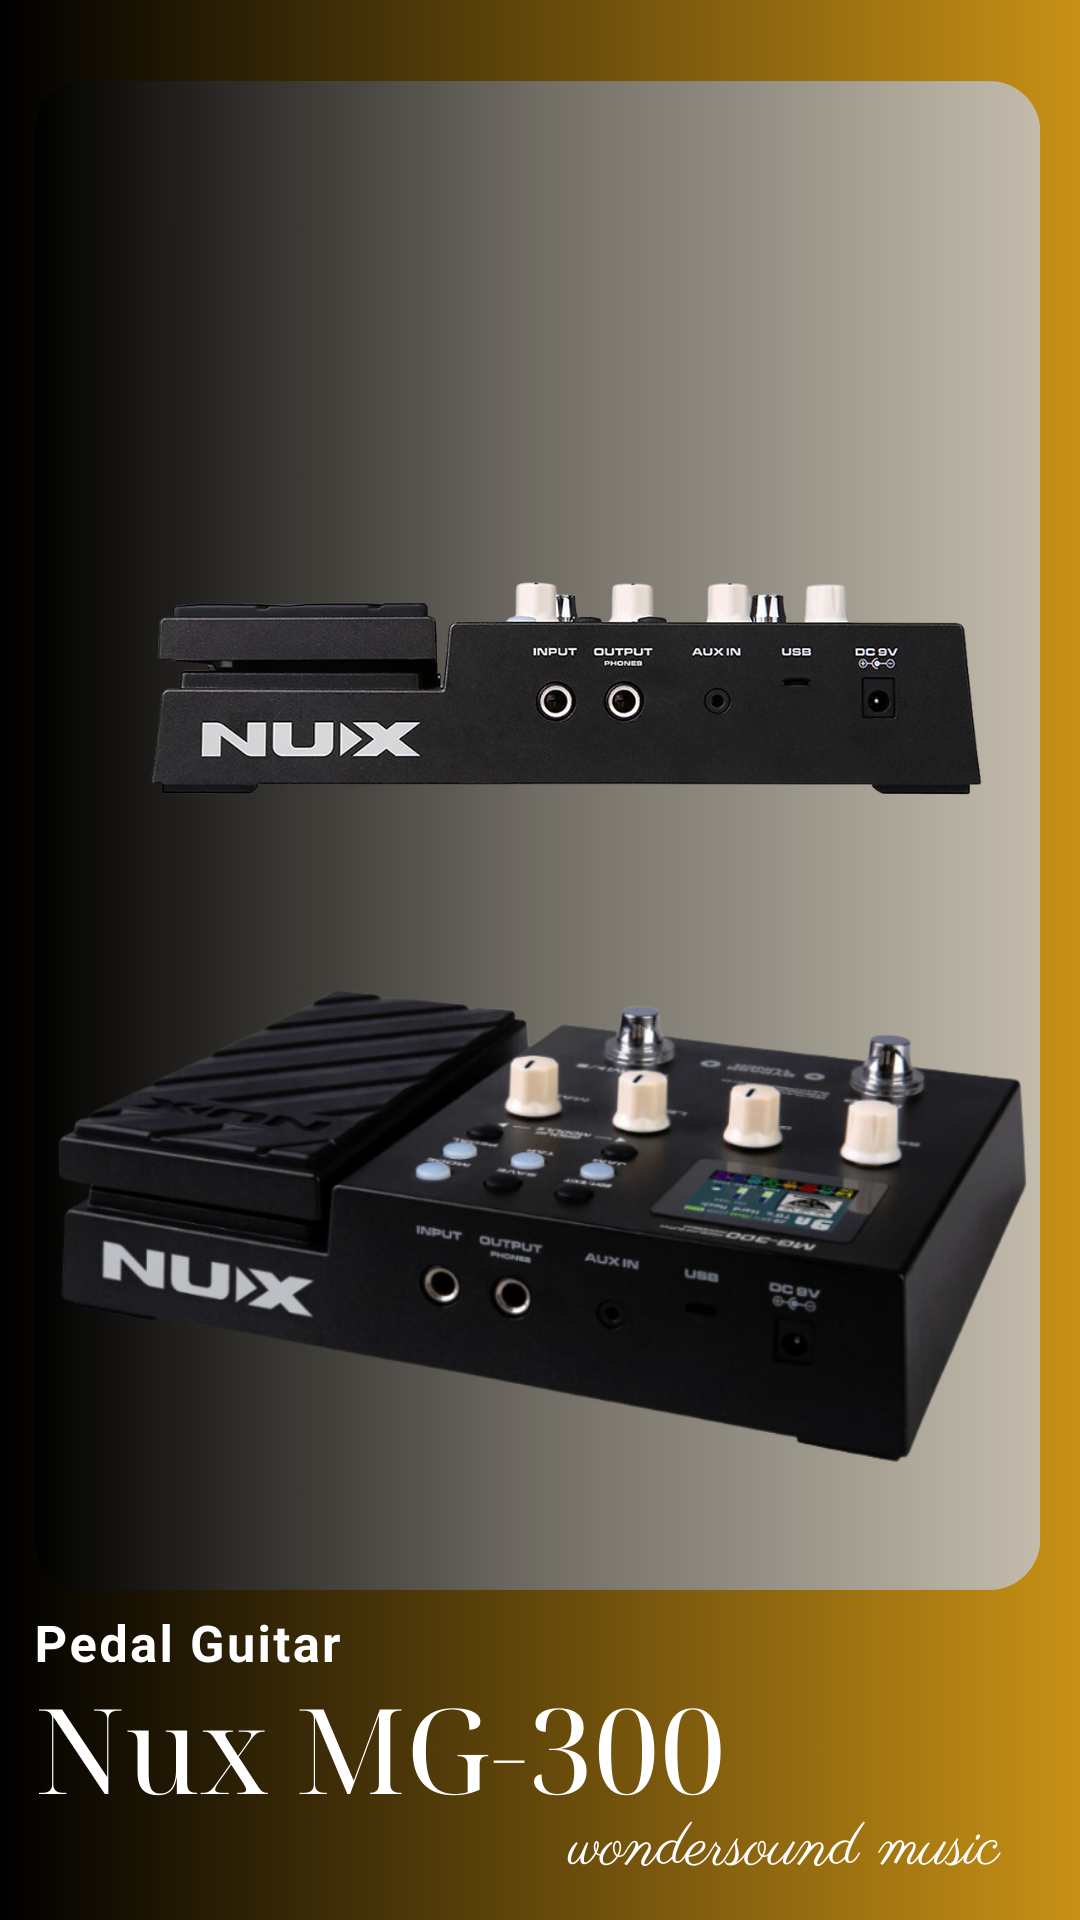  PEDAL GUITAR ELECTRIC (Multi Effects) NUX MG-300 